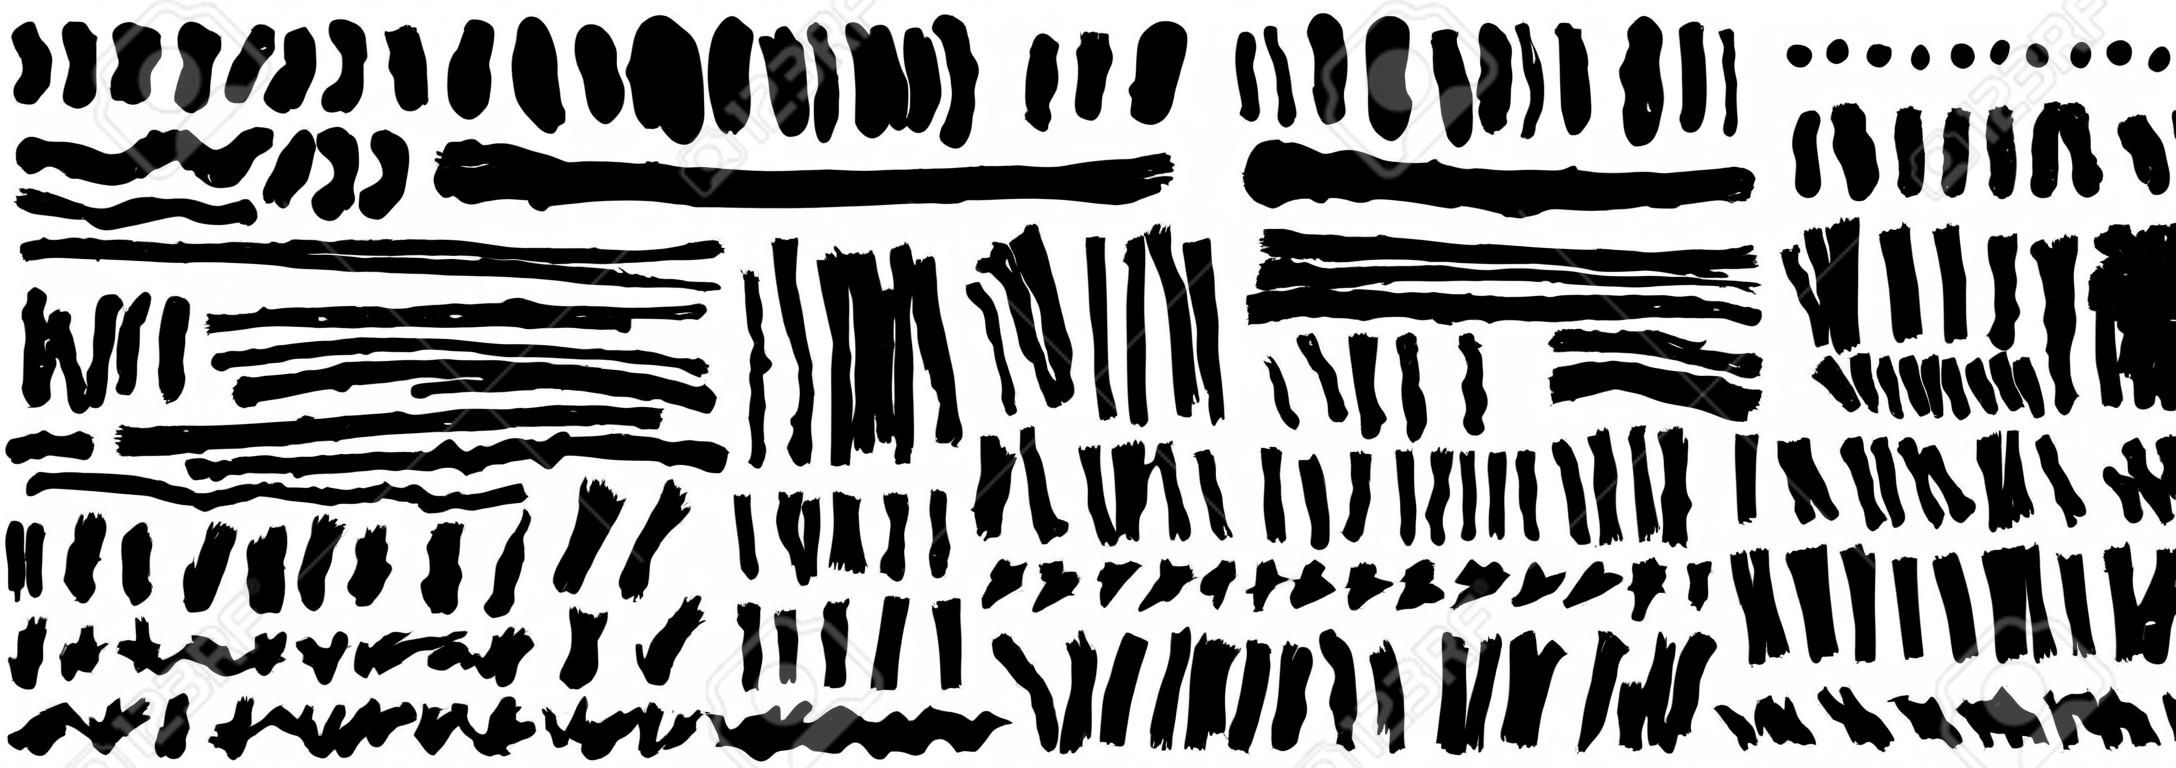 Set of hand draws black paint, ink brush strokes, brushes, lines. Dirty artistic grunge design elements. Vector